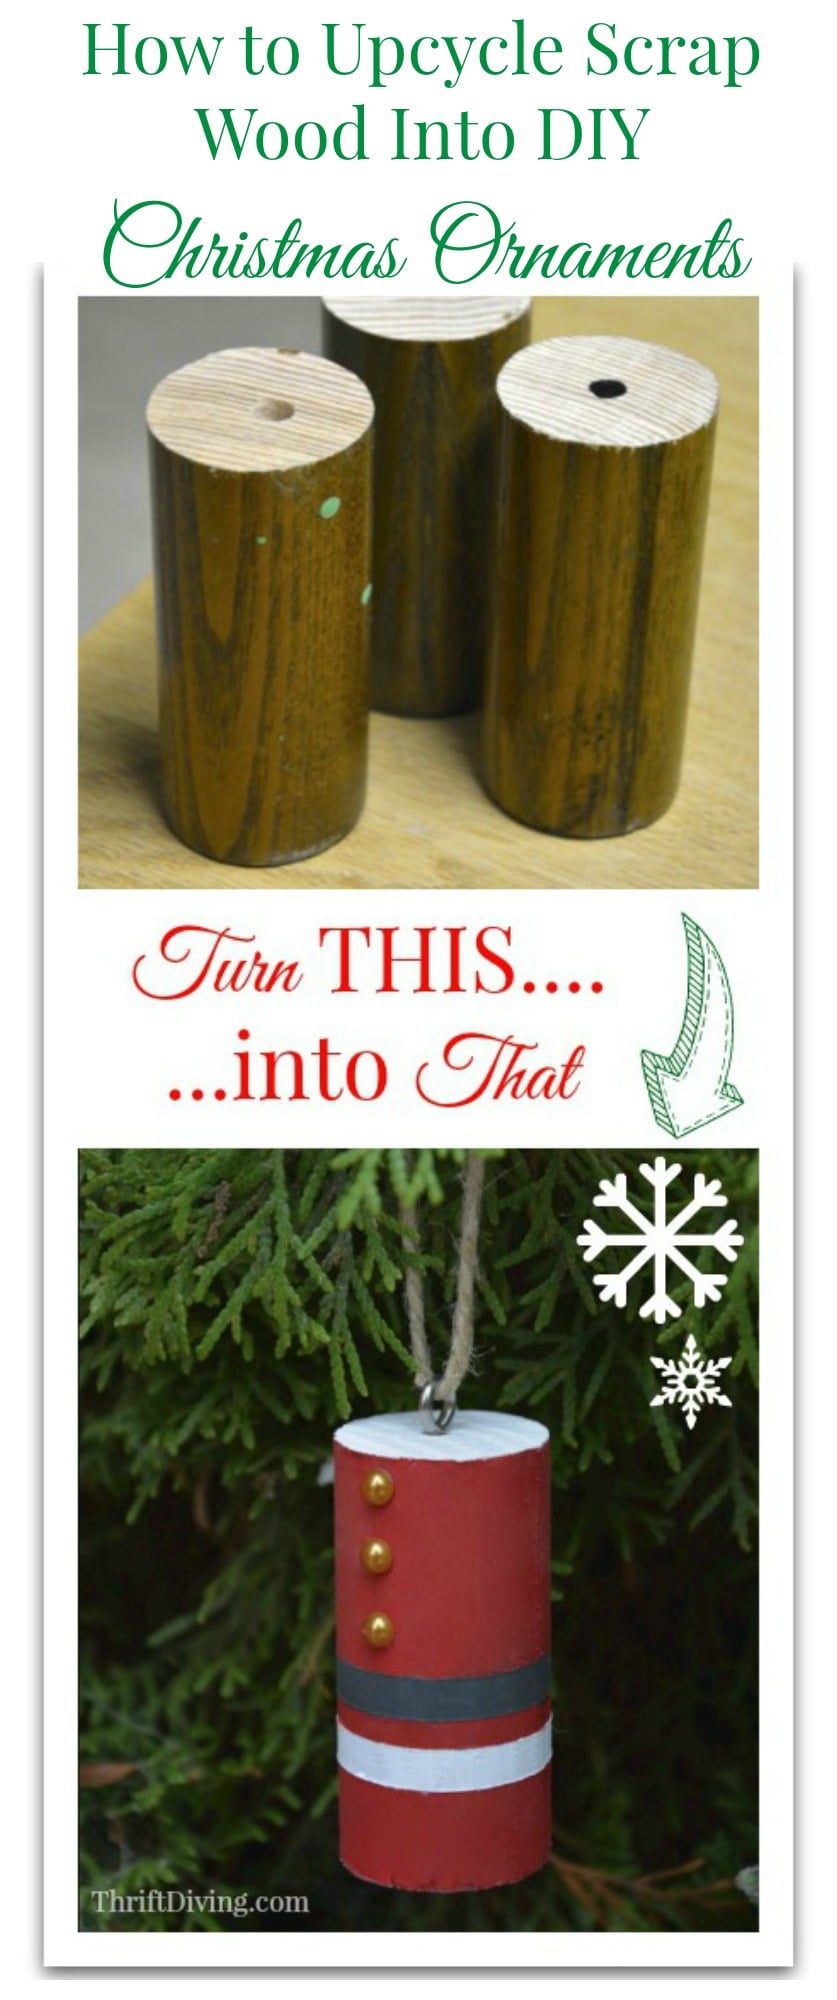 How to Upcycle Scrap Wood Into DIY Christmas Ornaments - Thrift Diving Blog